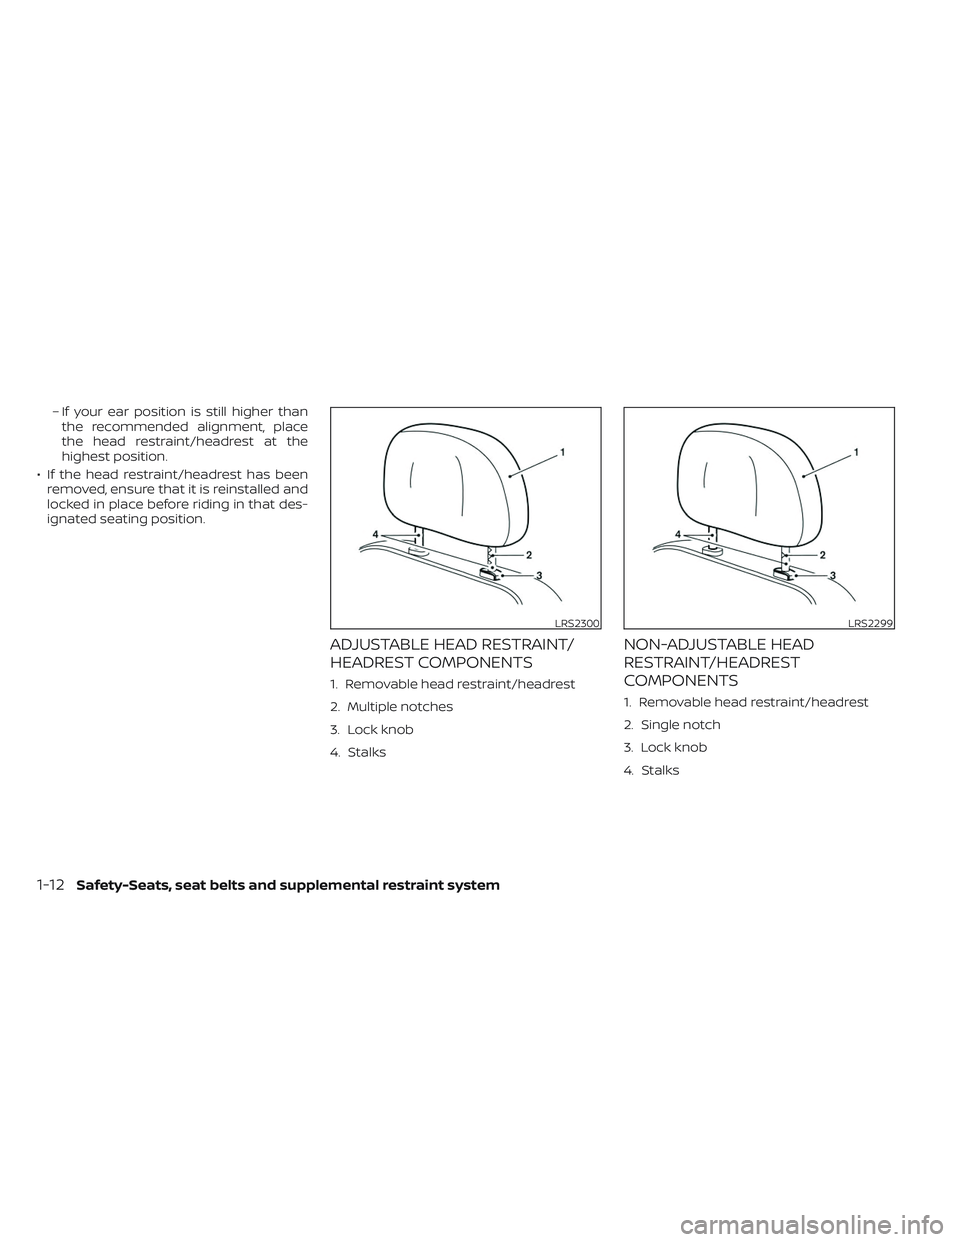 NISSAN TITAN 2022  Owners Manual – If your ear position is still higher thanthe recommended alignment, place
the head restraint/headrest at the
highest position.
• If the head restraint/headrest has been removed, ensure that it i